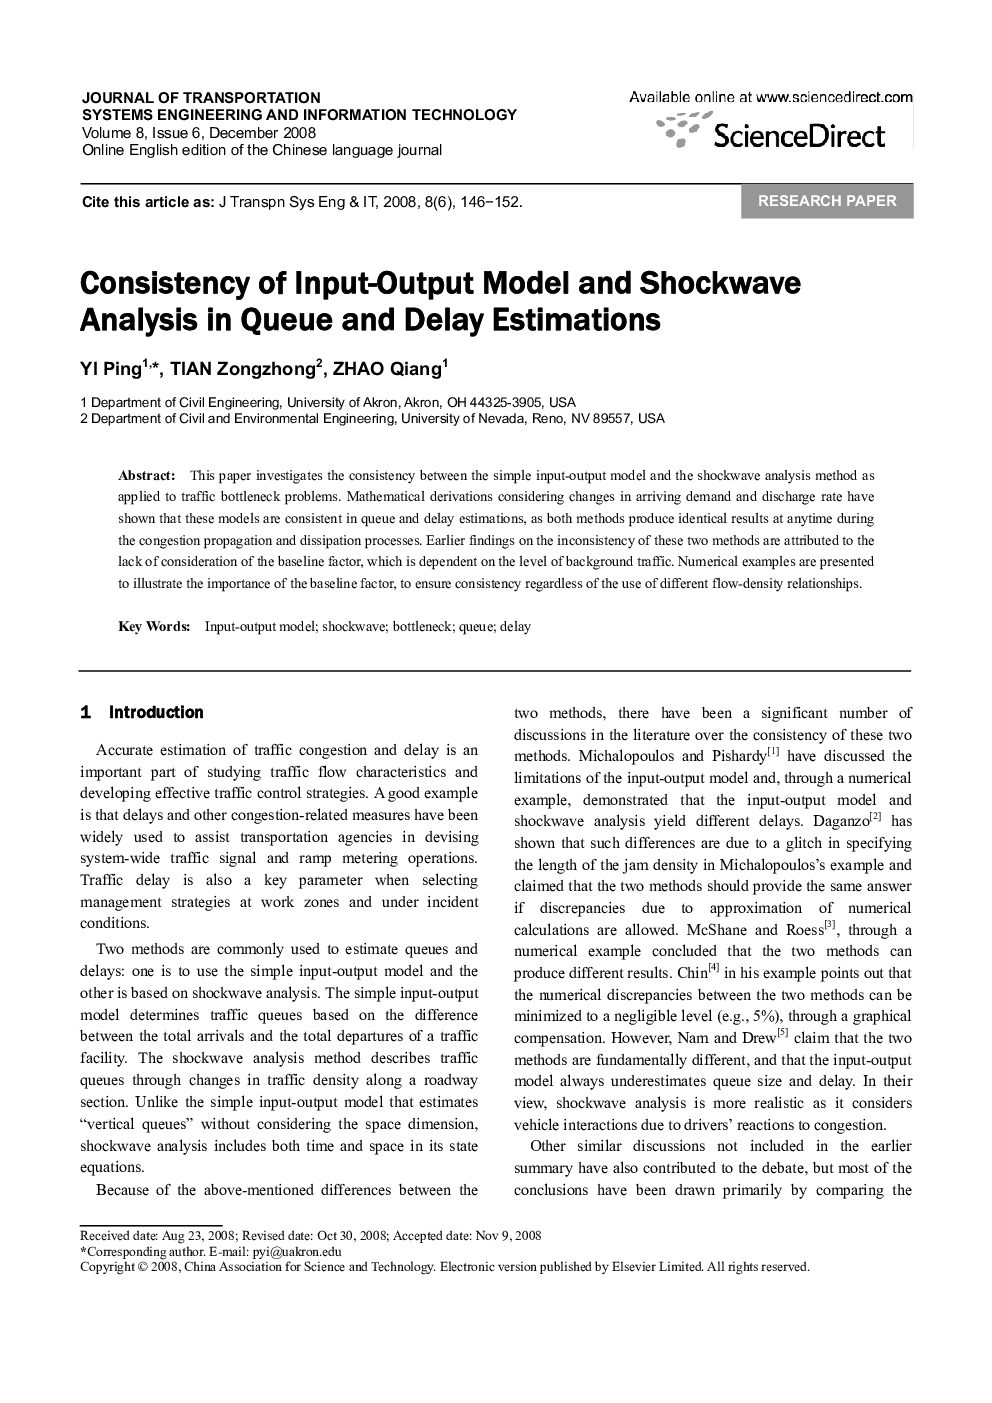 Consistency of Input-Output Model and Shockwave Analysis in Queue and Delay Estimations